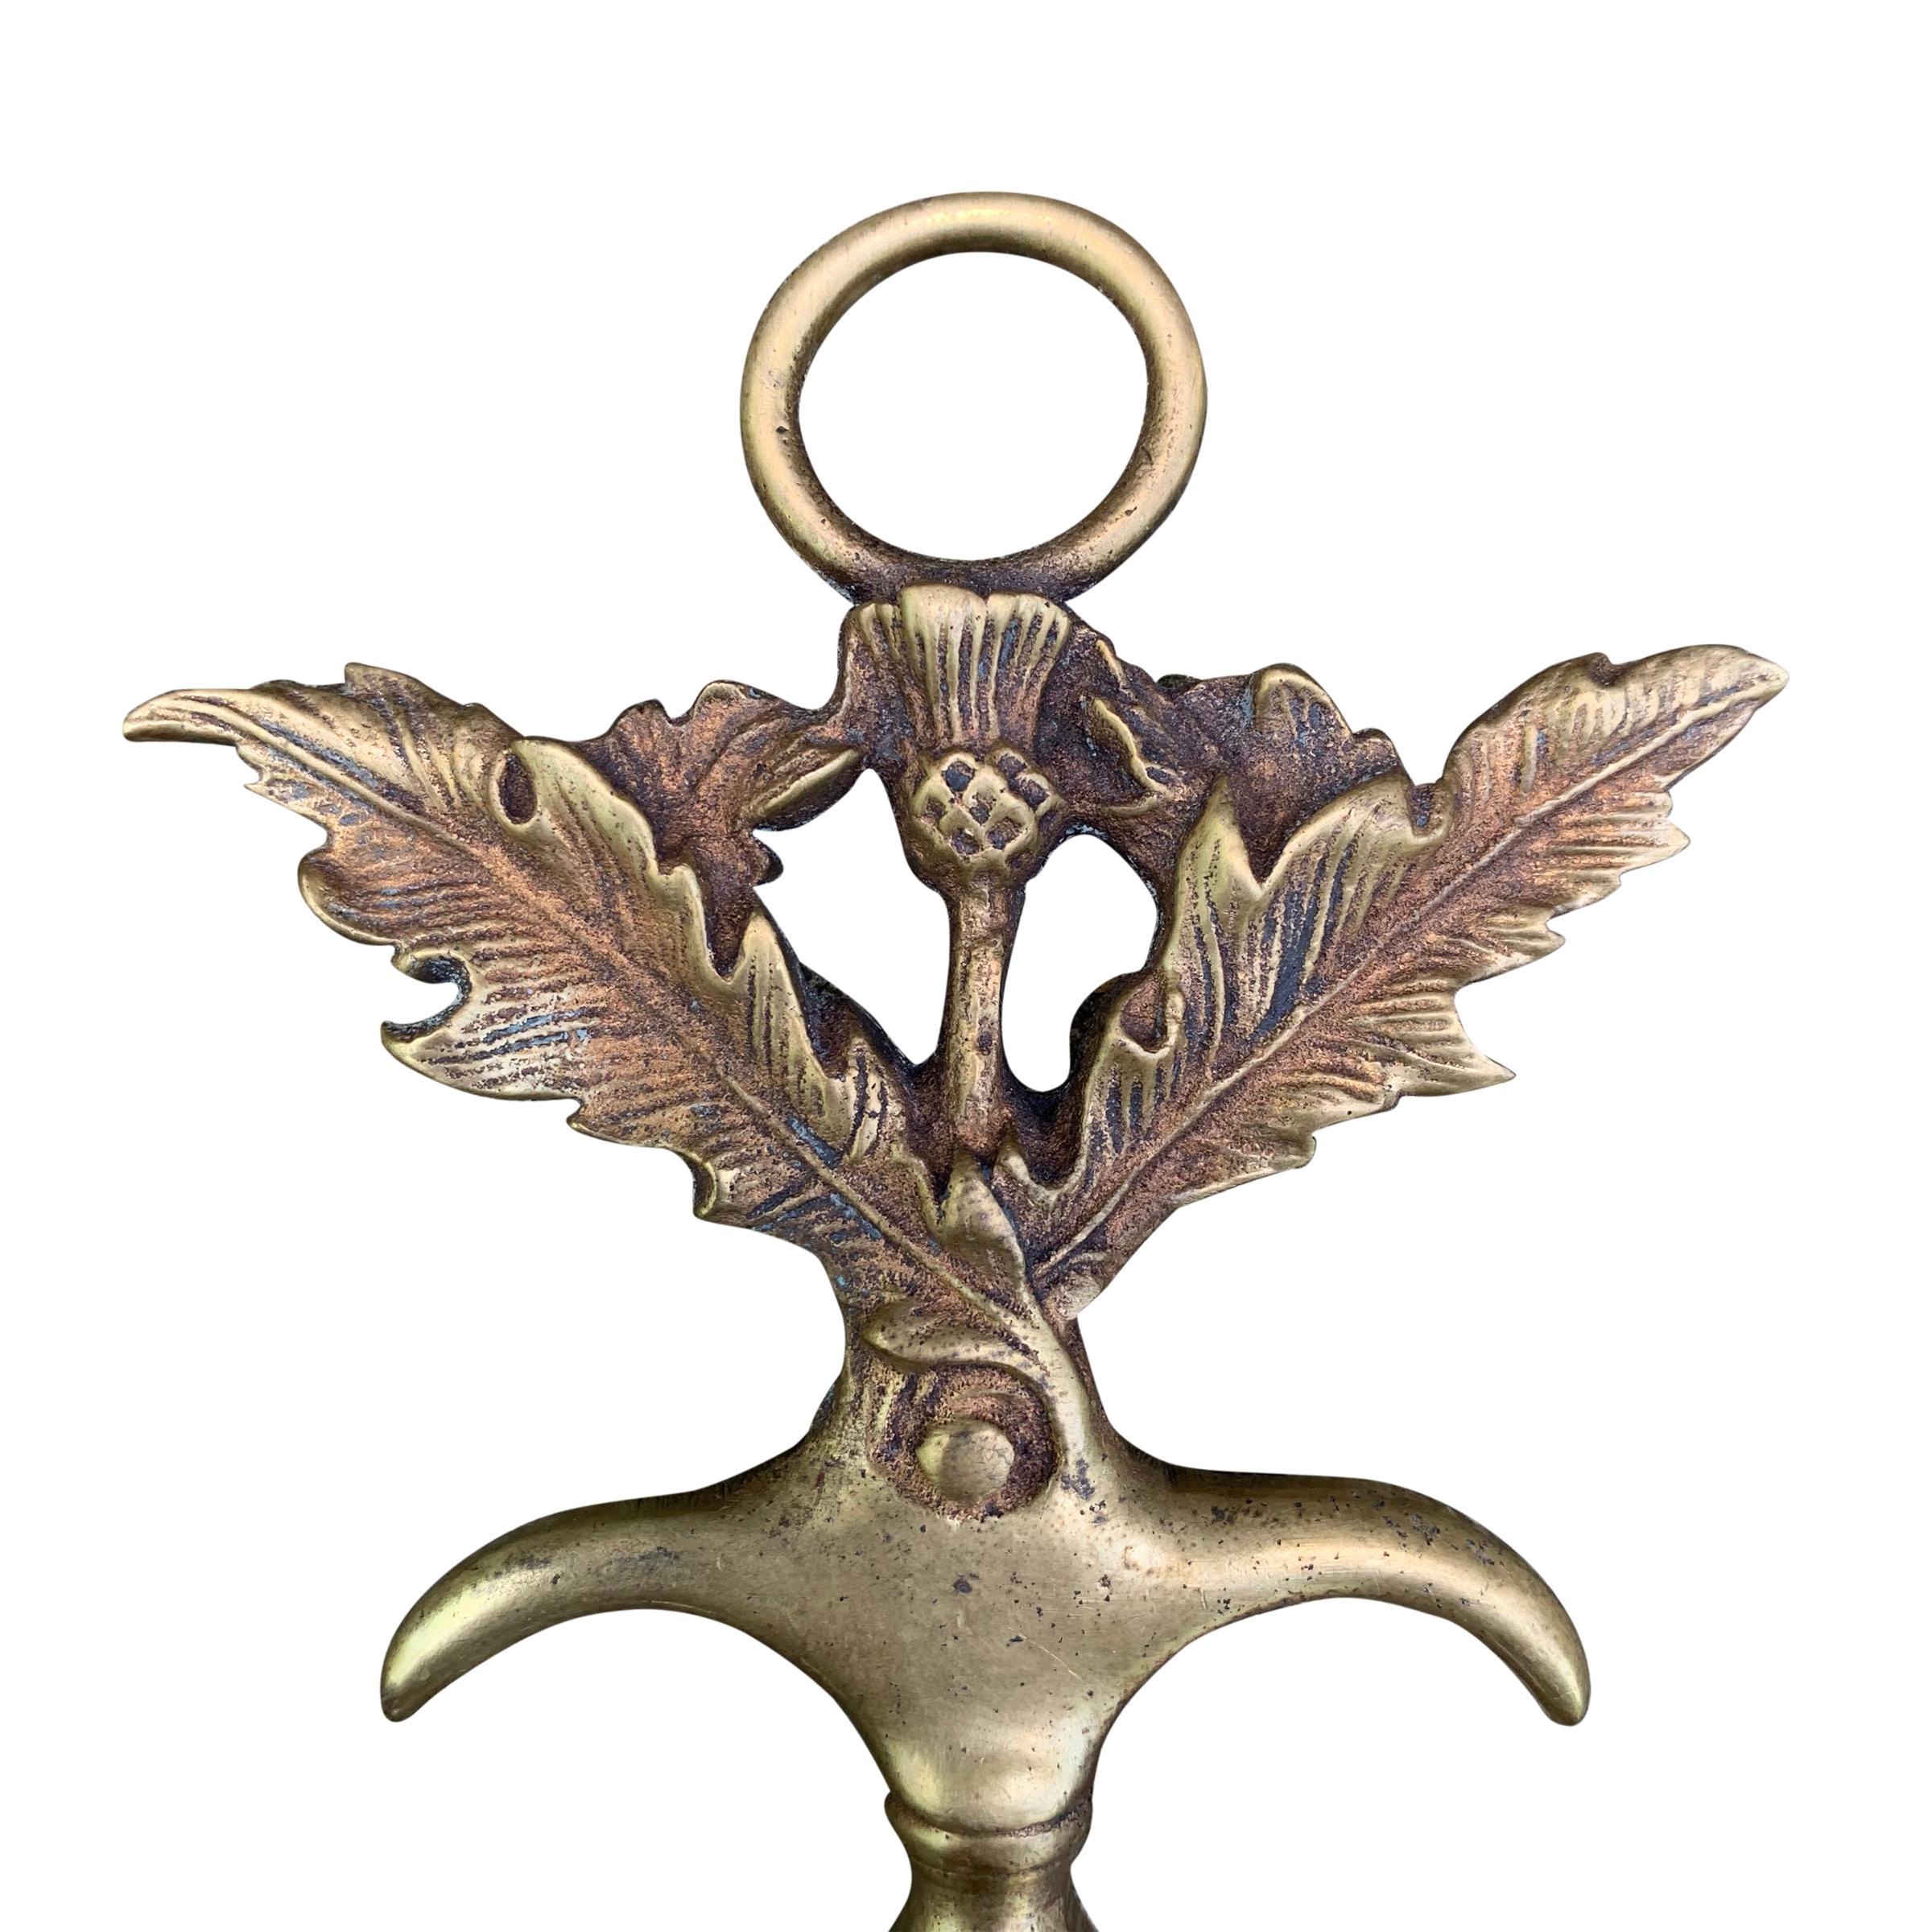 An early 20th century English cast brass corkscrew with a loop and two hooks help to pop the cork, and a Scottish thistle motif.